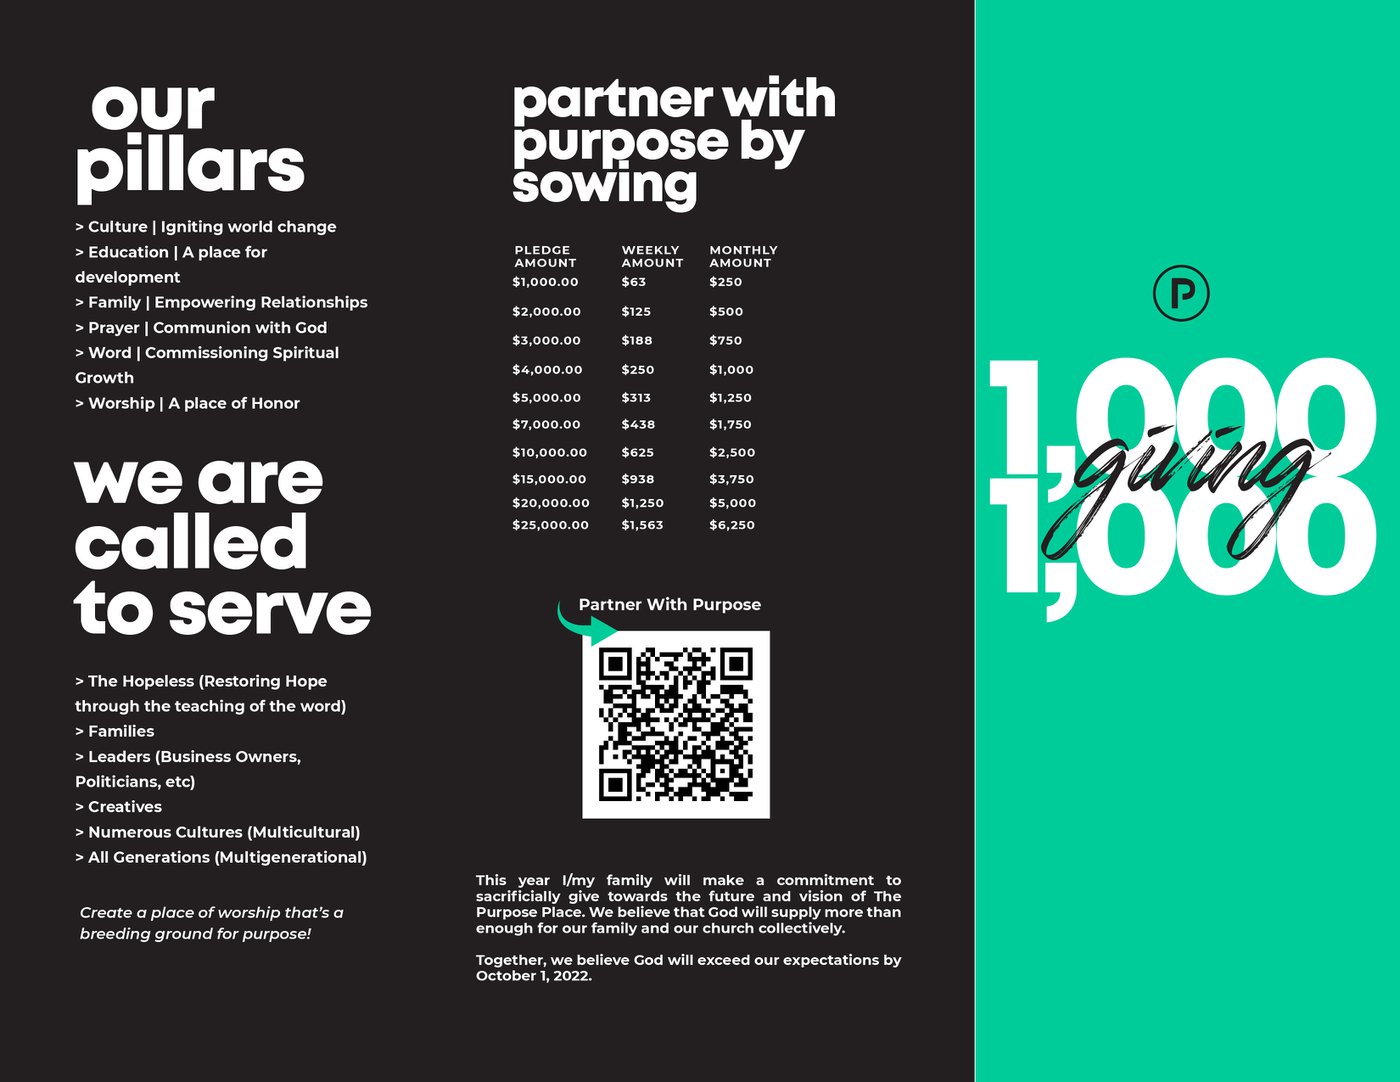 Our Pillars| Partner With Purpose by Sowing